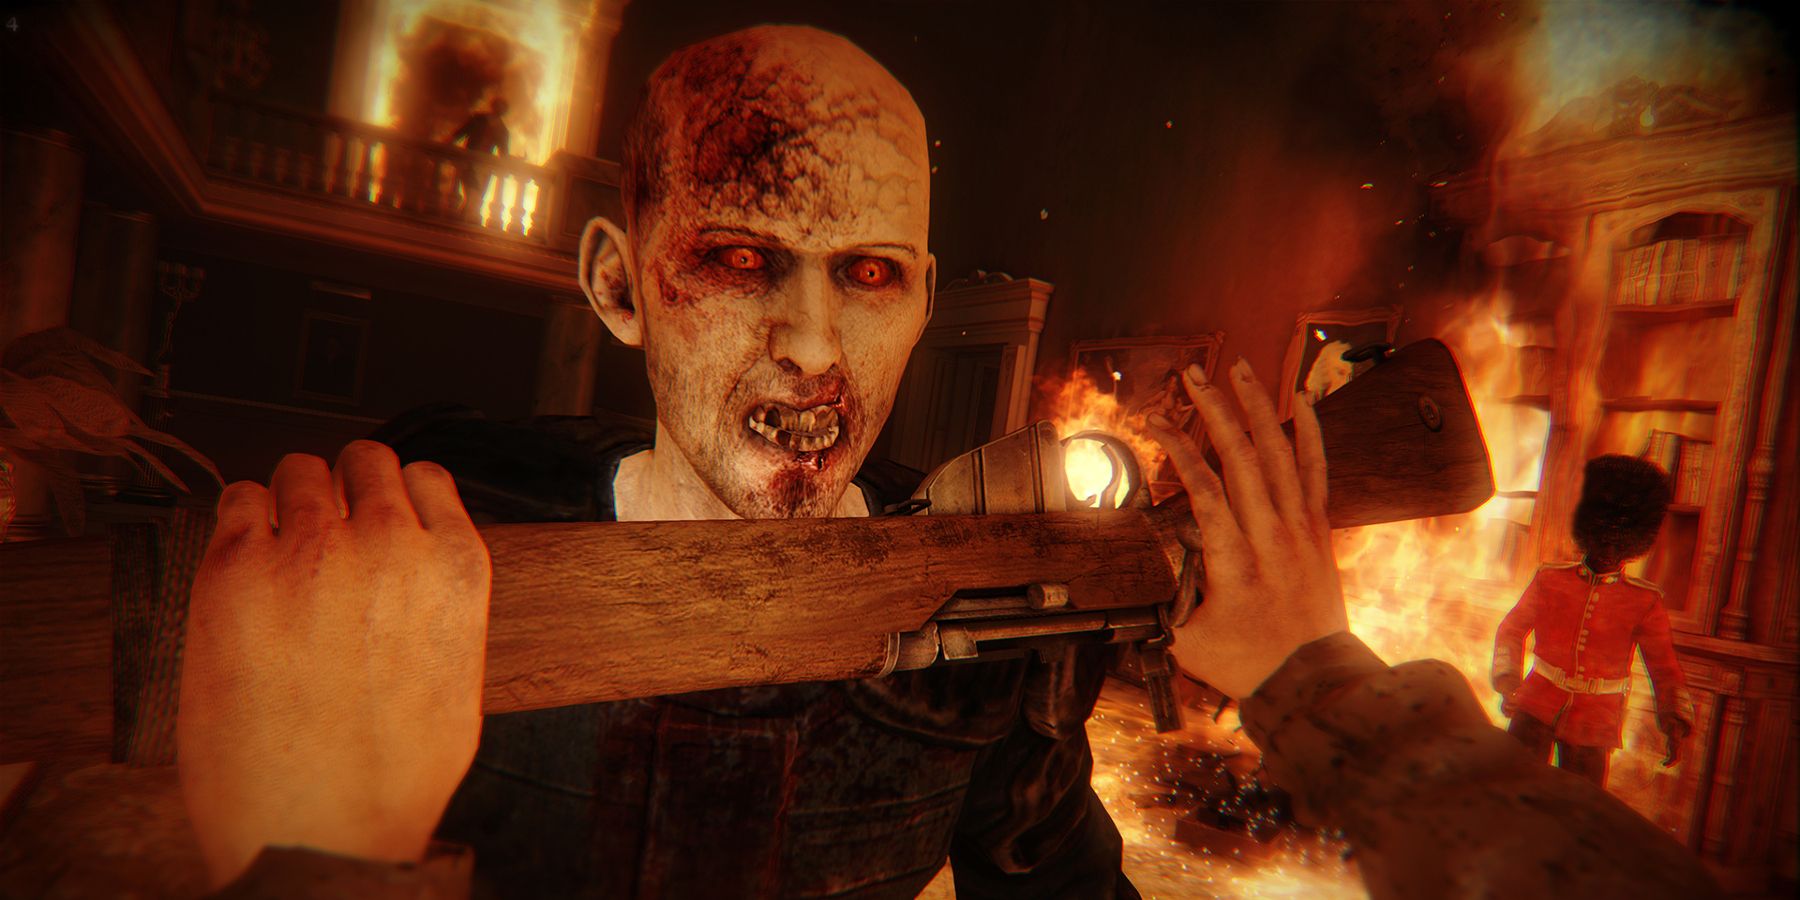 Survivor restraining a zombie with a gun in zombie survival video game ZombiU.